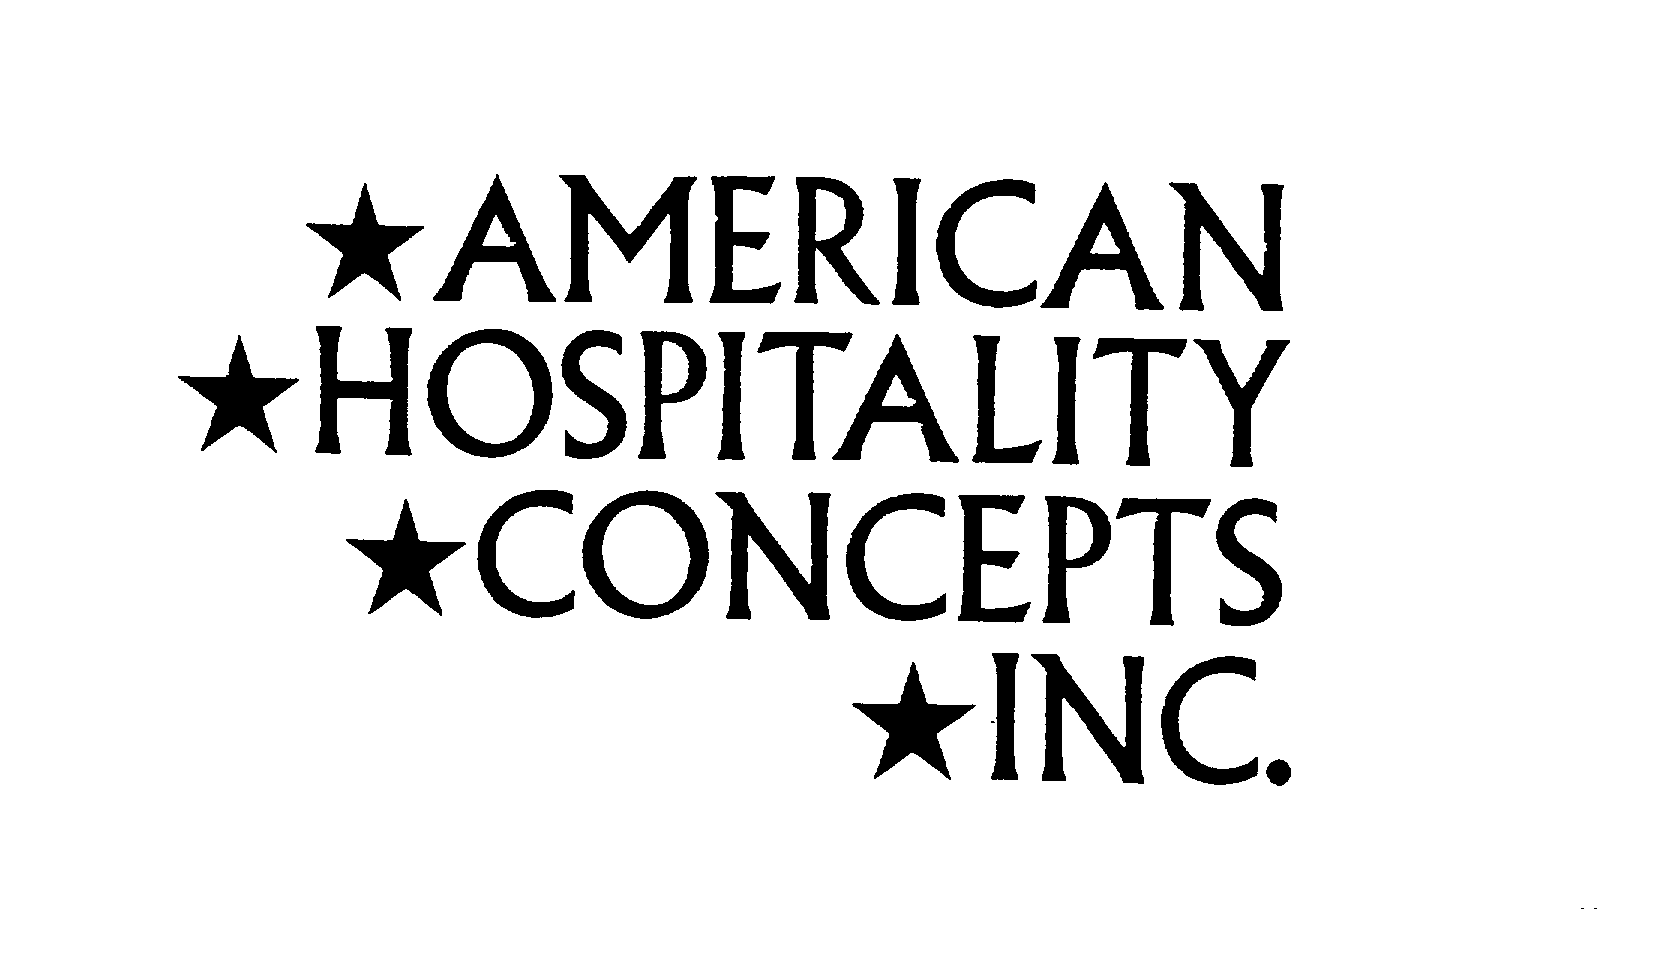  AMERICAN HOSPITALITY CONCEPTS INC.